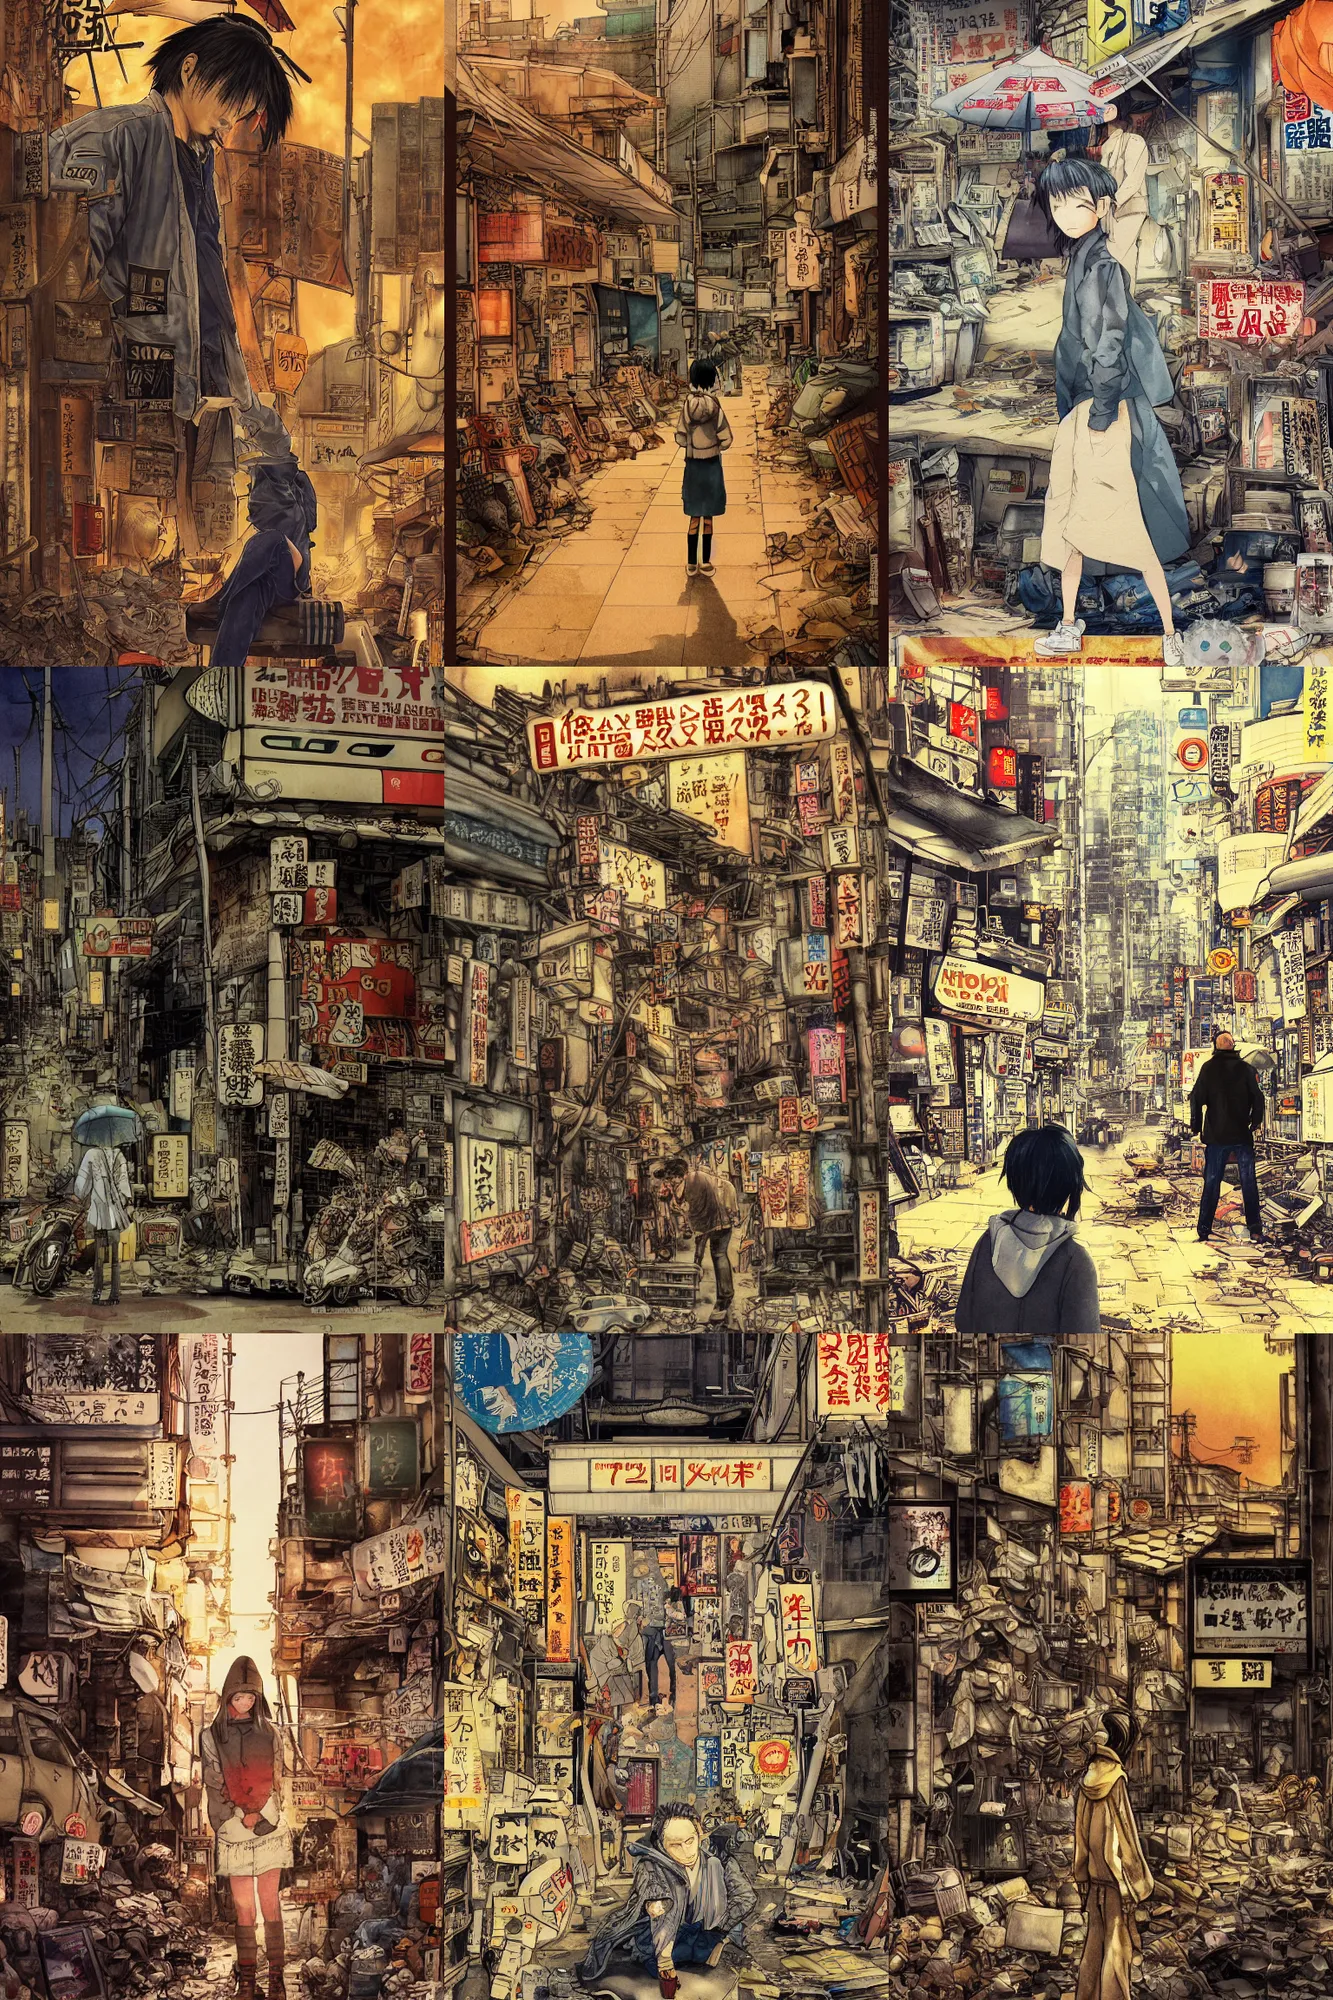 Prompt: tatsuyuki tanaka movie poster, genius party, shinjuku, koji morimoto, katsuya terada, masamune shirow, tatsuyuki tanaka, bold golden hour lighting, watercolor, paper texture, movie scene, distant shot of hoody girl side view sitting under a parasol in deserted dusty shinjuku junk town, old pawn shop, bright sun bleached ground ,scary chameleon face muscle robot monster lurks in the background, ghost mask, teeth, animatronic, black smoke, pale beige sky, junk tv, texture, strange, impossible, fur, spines, mouth, pipe brain, shell, brown mud, dust, bored expression, overhead wires, telephone pole, dusty, dry, pencil marks, hd, 4k, remaster, dynamic camera angle, deep 3 point perspective, fish eye, dynamic scene